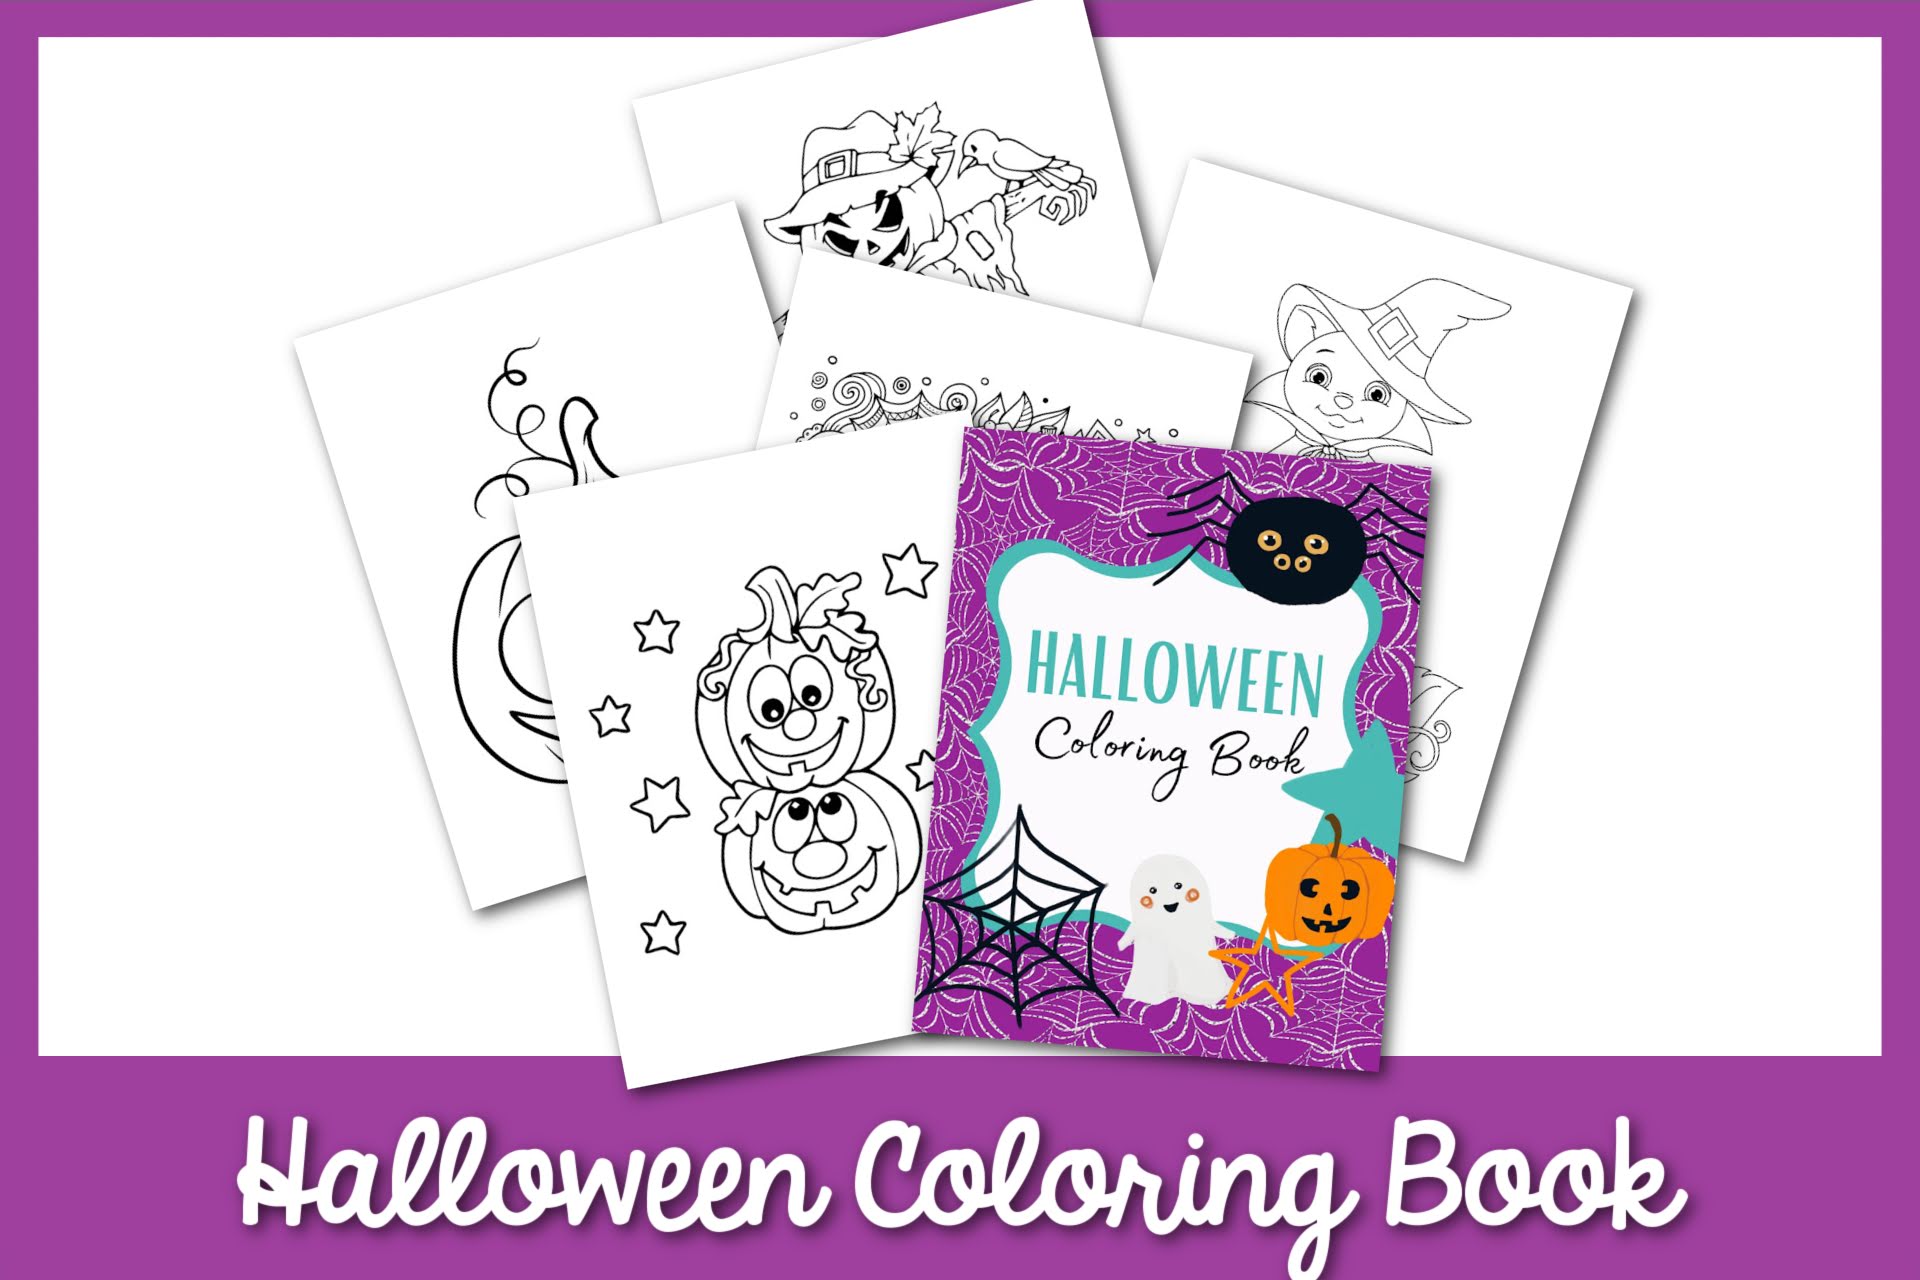 featured image: halloween coloring book on a purple border